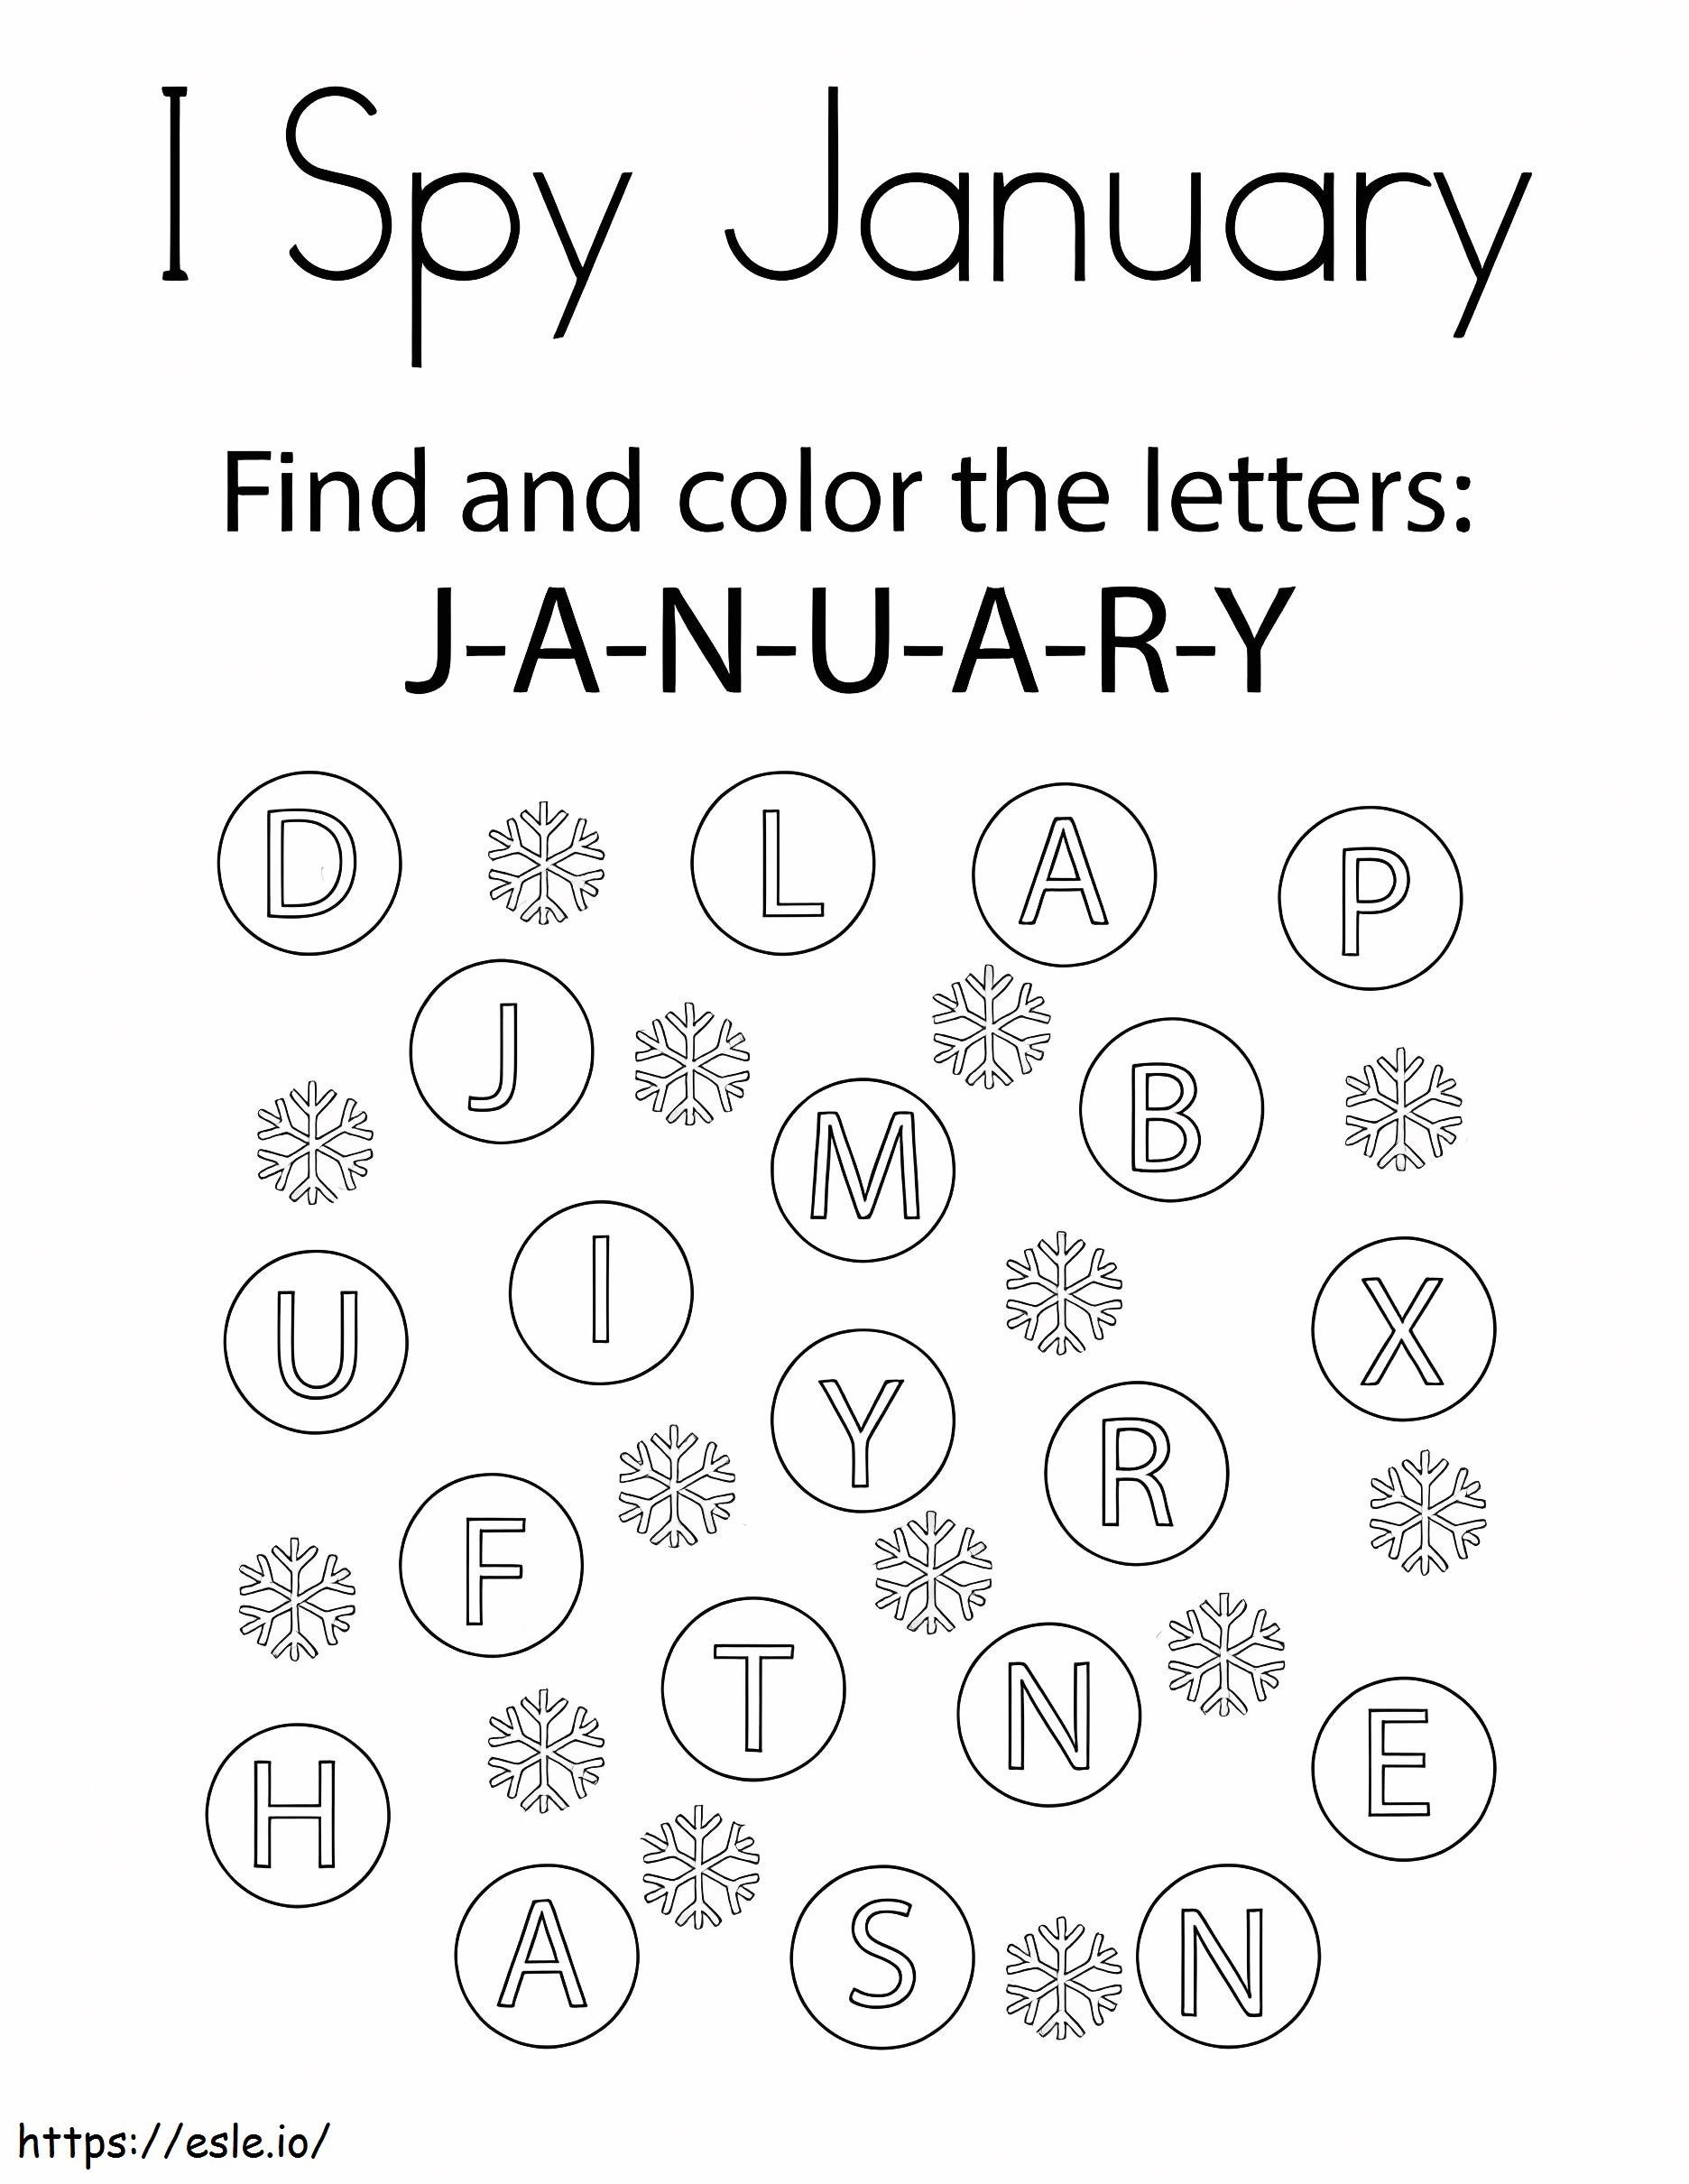 I Spy January coloring page